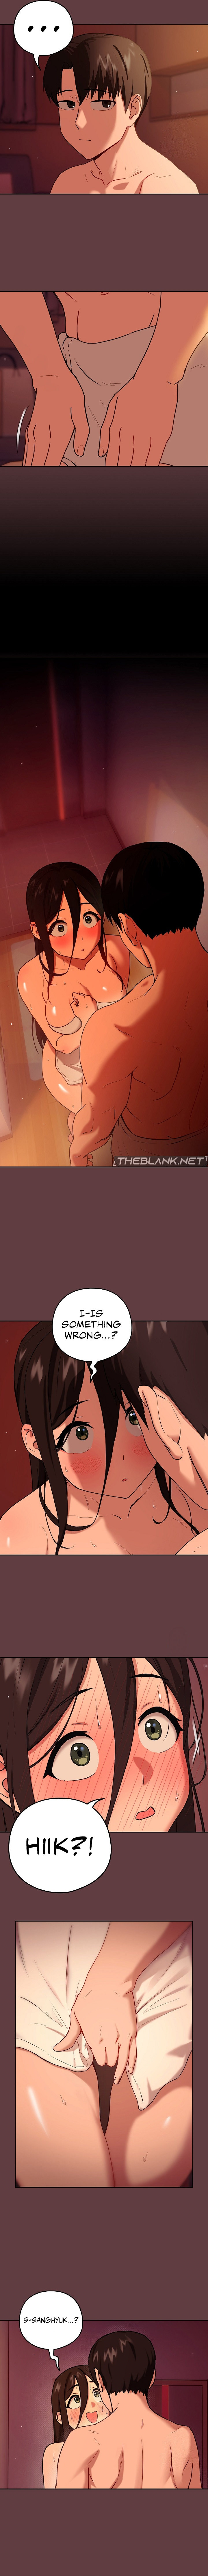 After Work Love Affairs - Chapter 5 Page 4